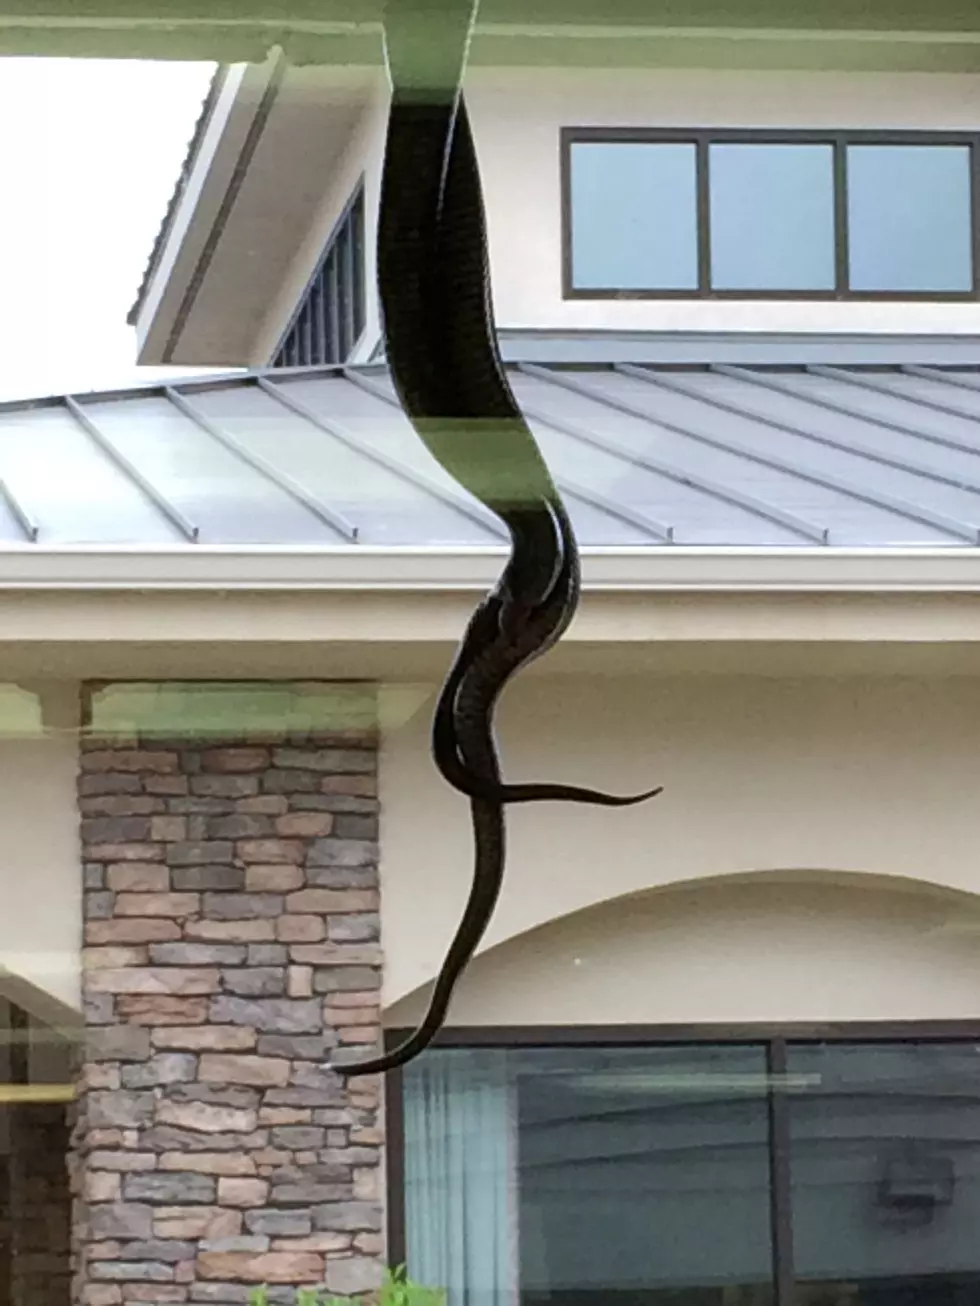 Snakes are Everywhere in the Shreveport/Bossier City Area! [PICS]